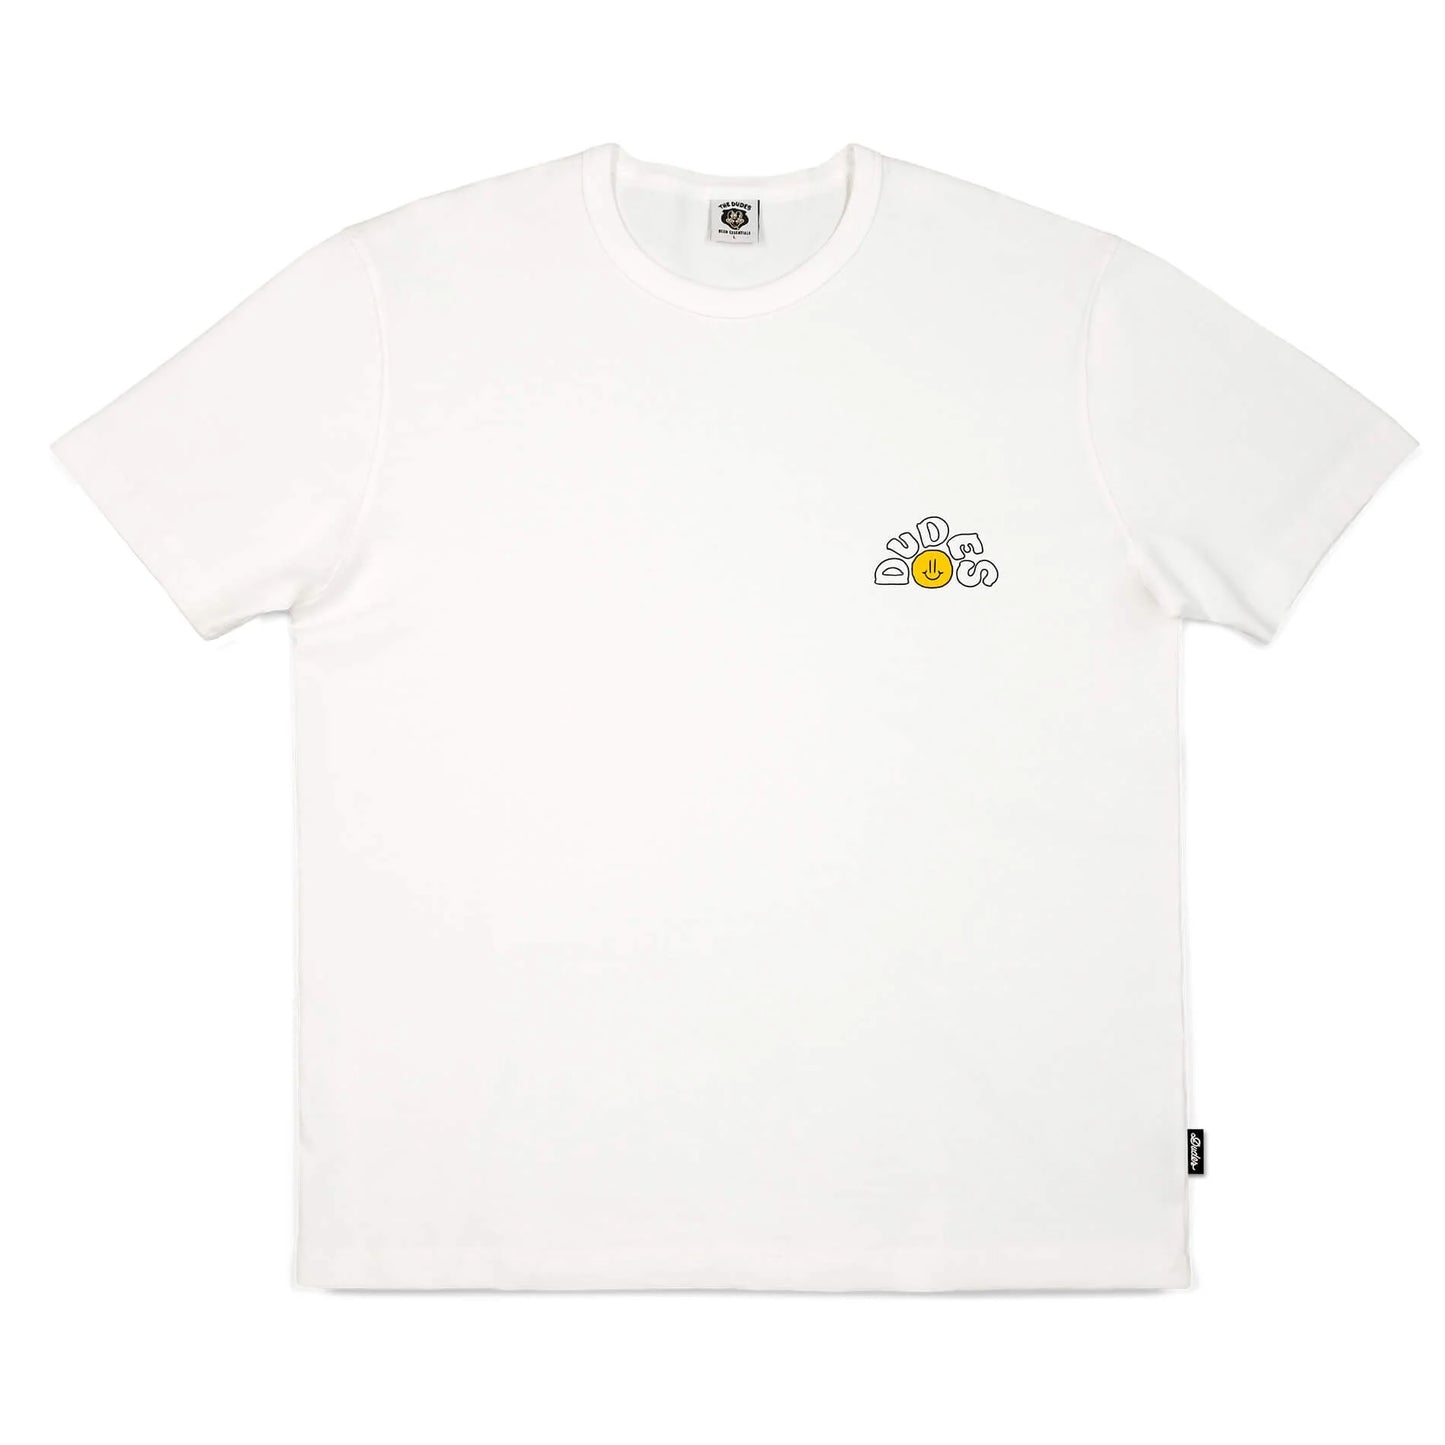 THE DUDES A PILL MEAL SS TEE  - Off White